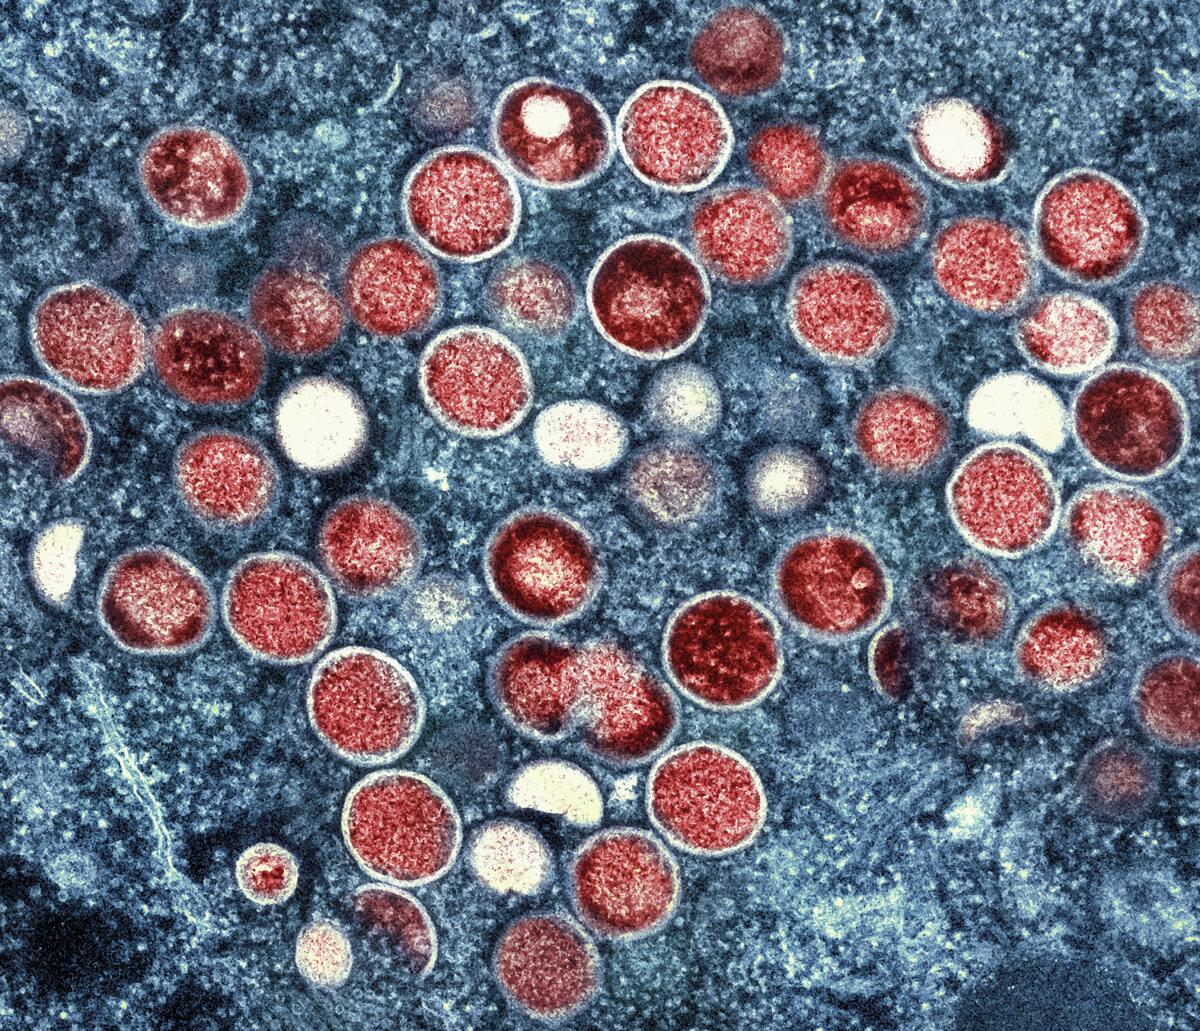 FILE - This image provided by the National Institute of Allergy and Infectious Diseases (NIAID) shows a colorized transmission electron micrograph of monkeypox particles (red) found within an infected cell (blue), cultured in the laboratory that was captured and color-enhanced at the NIAID Integrated Research Facility (IRF) in Fort Detrick, Md. The official IRNA news agency reported announced Tuesday, Aug. 16, 2022, the first case of monkeypox in the nation. The report said health authorities quarantined a 34-year-old woman living in the southwestern city of Ahvaz. (NIAID via AP, File)